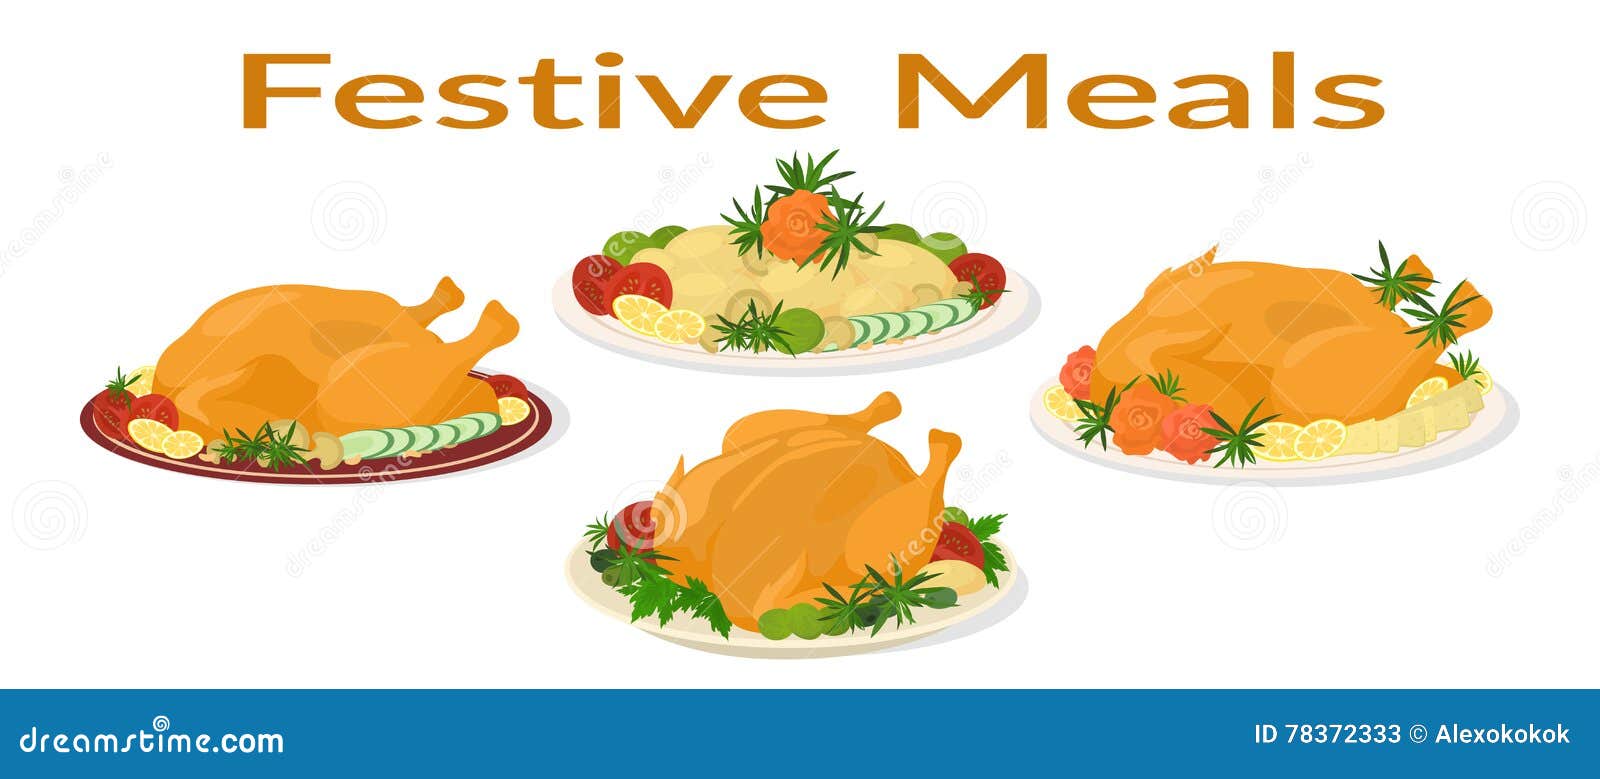 Set of Delicious Festive Food on Plates Holiday Christmas Roasted Turkeys and Fried Potatoes on White Background Vector